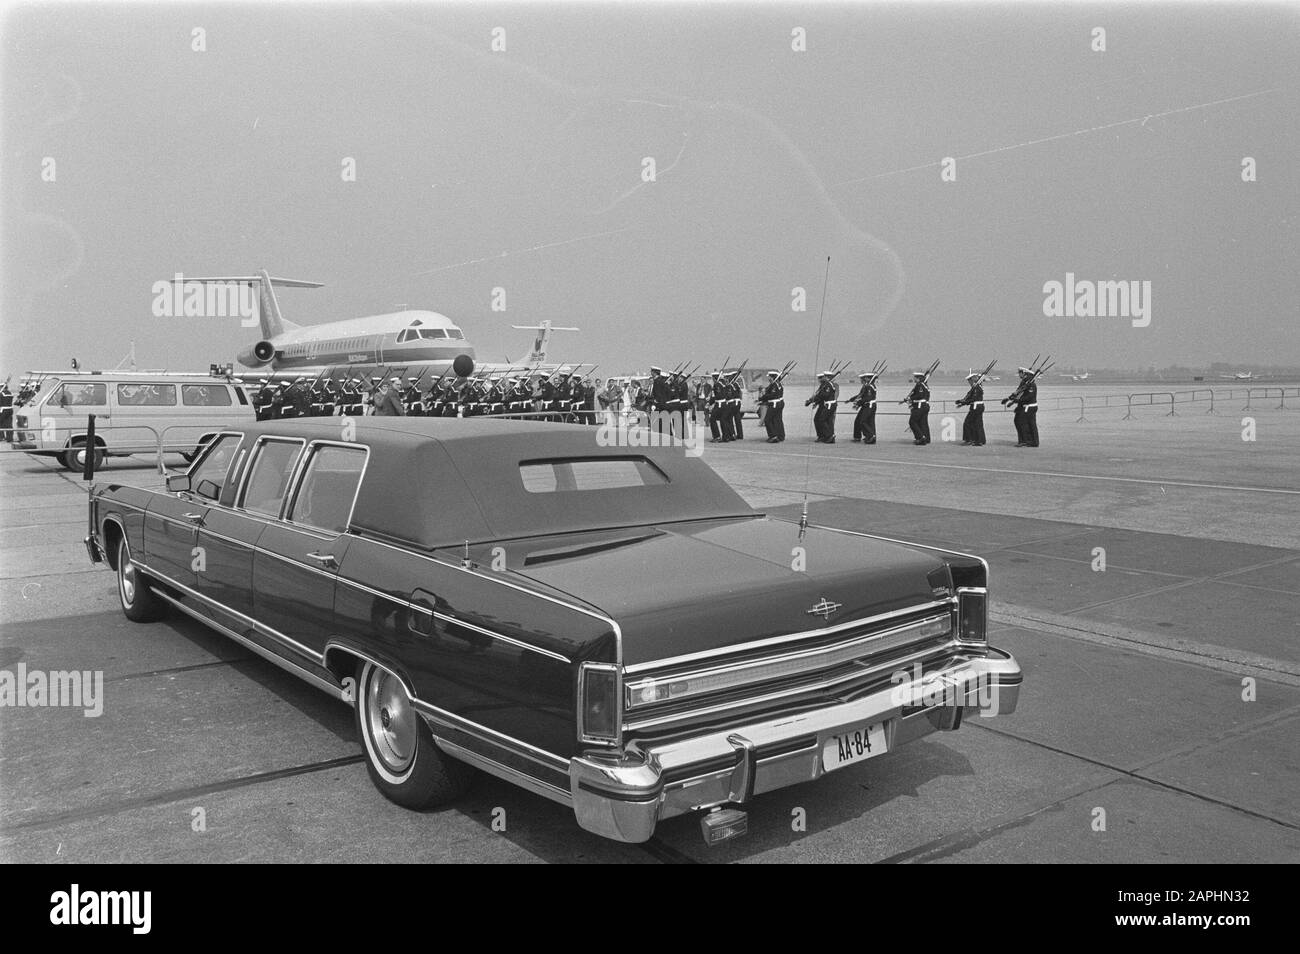 Reception of President Kaunda of Zambia at Zambia airport by Queen Beatrix Description: The limousine the President could not leave with because the keys were in the locked car. Date: April 13, 1986 Location: Rotterdam, Zestienhoven, Zuid-Holland Keywords: Cars, honorary guards, presidents, state visits, airports Institution name: Zestienhoven Stock Photo